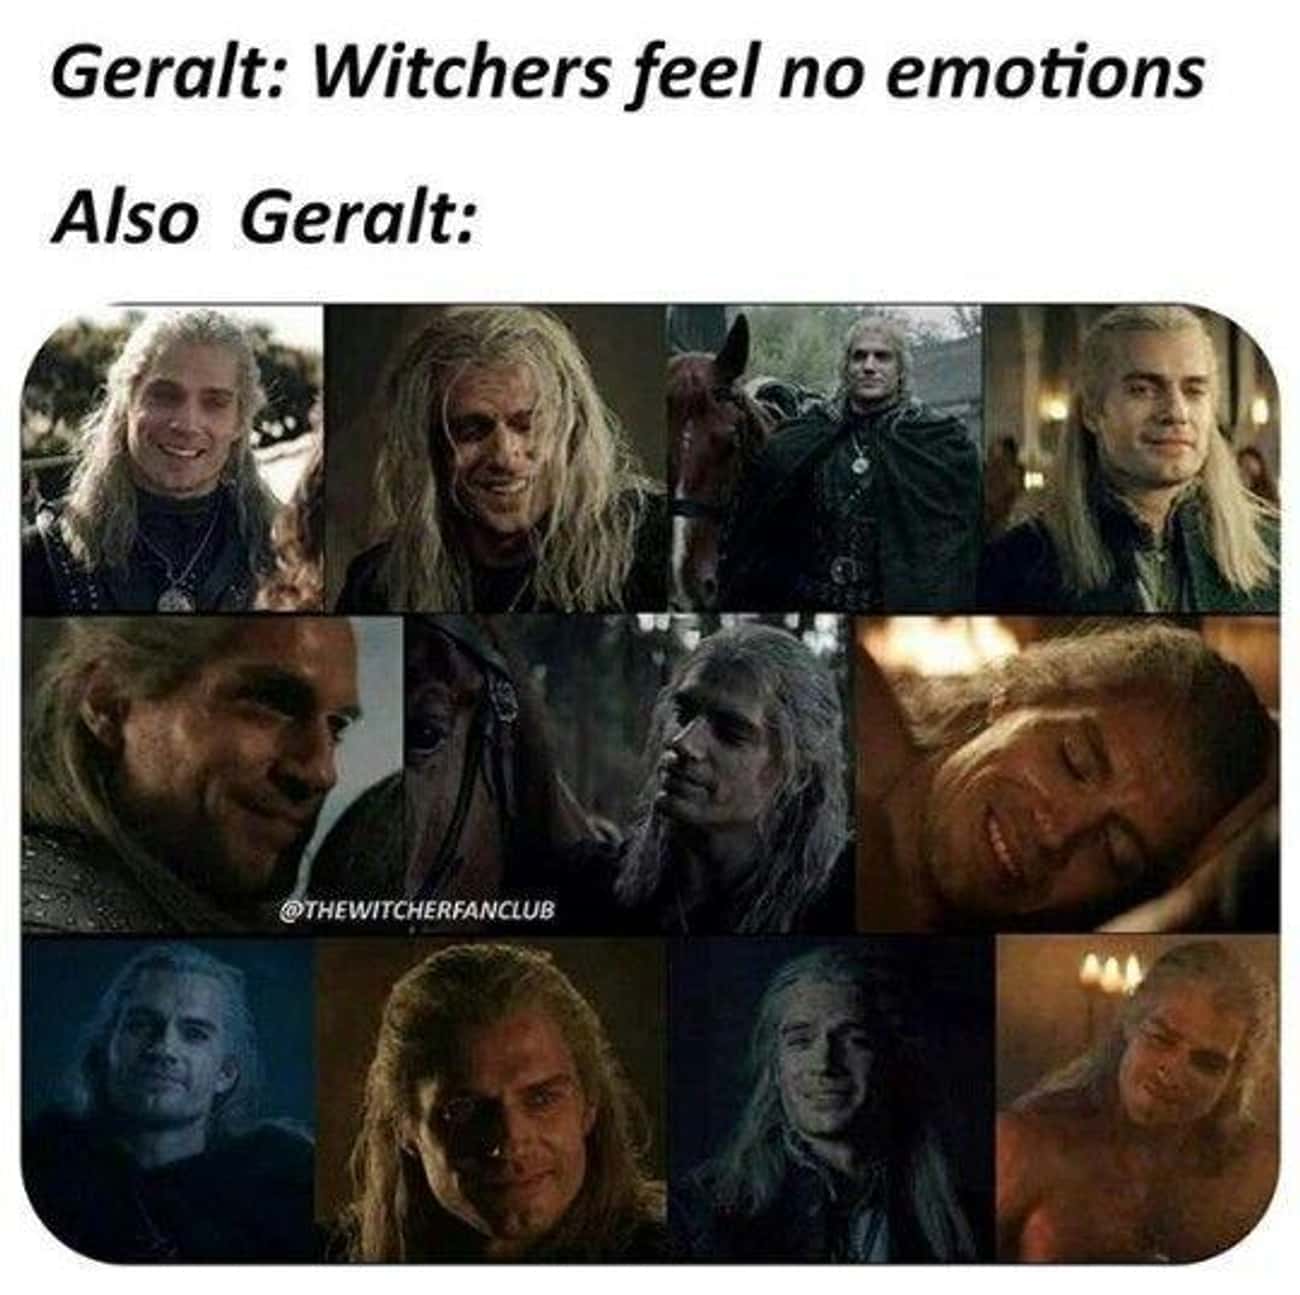 The Real Geralt